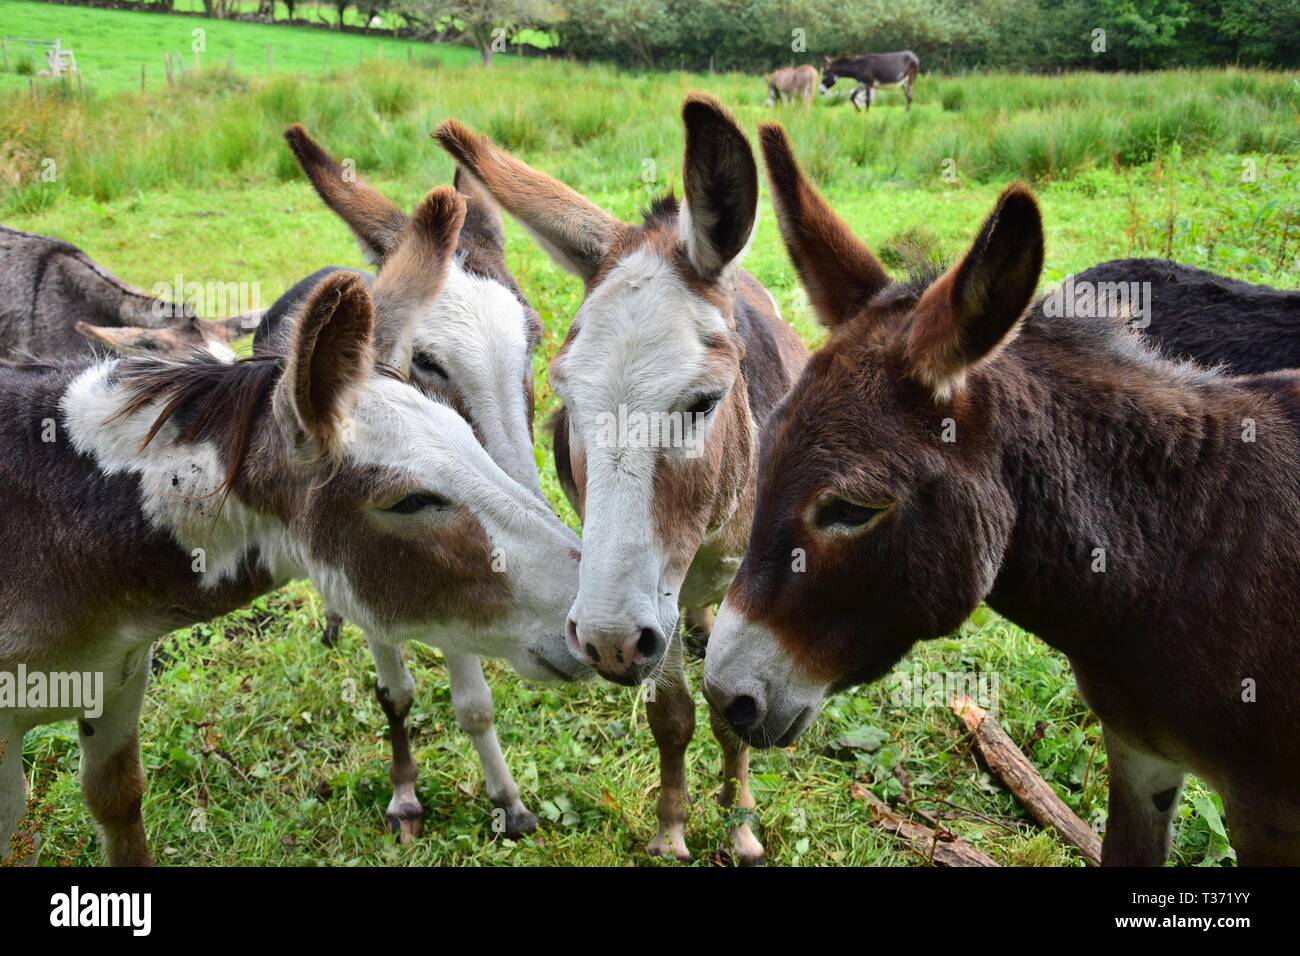 A group of donkeys of different colors sticking their heads together on a meadow in Ireland. Stock Photo